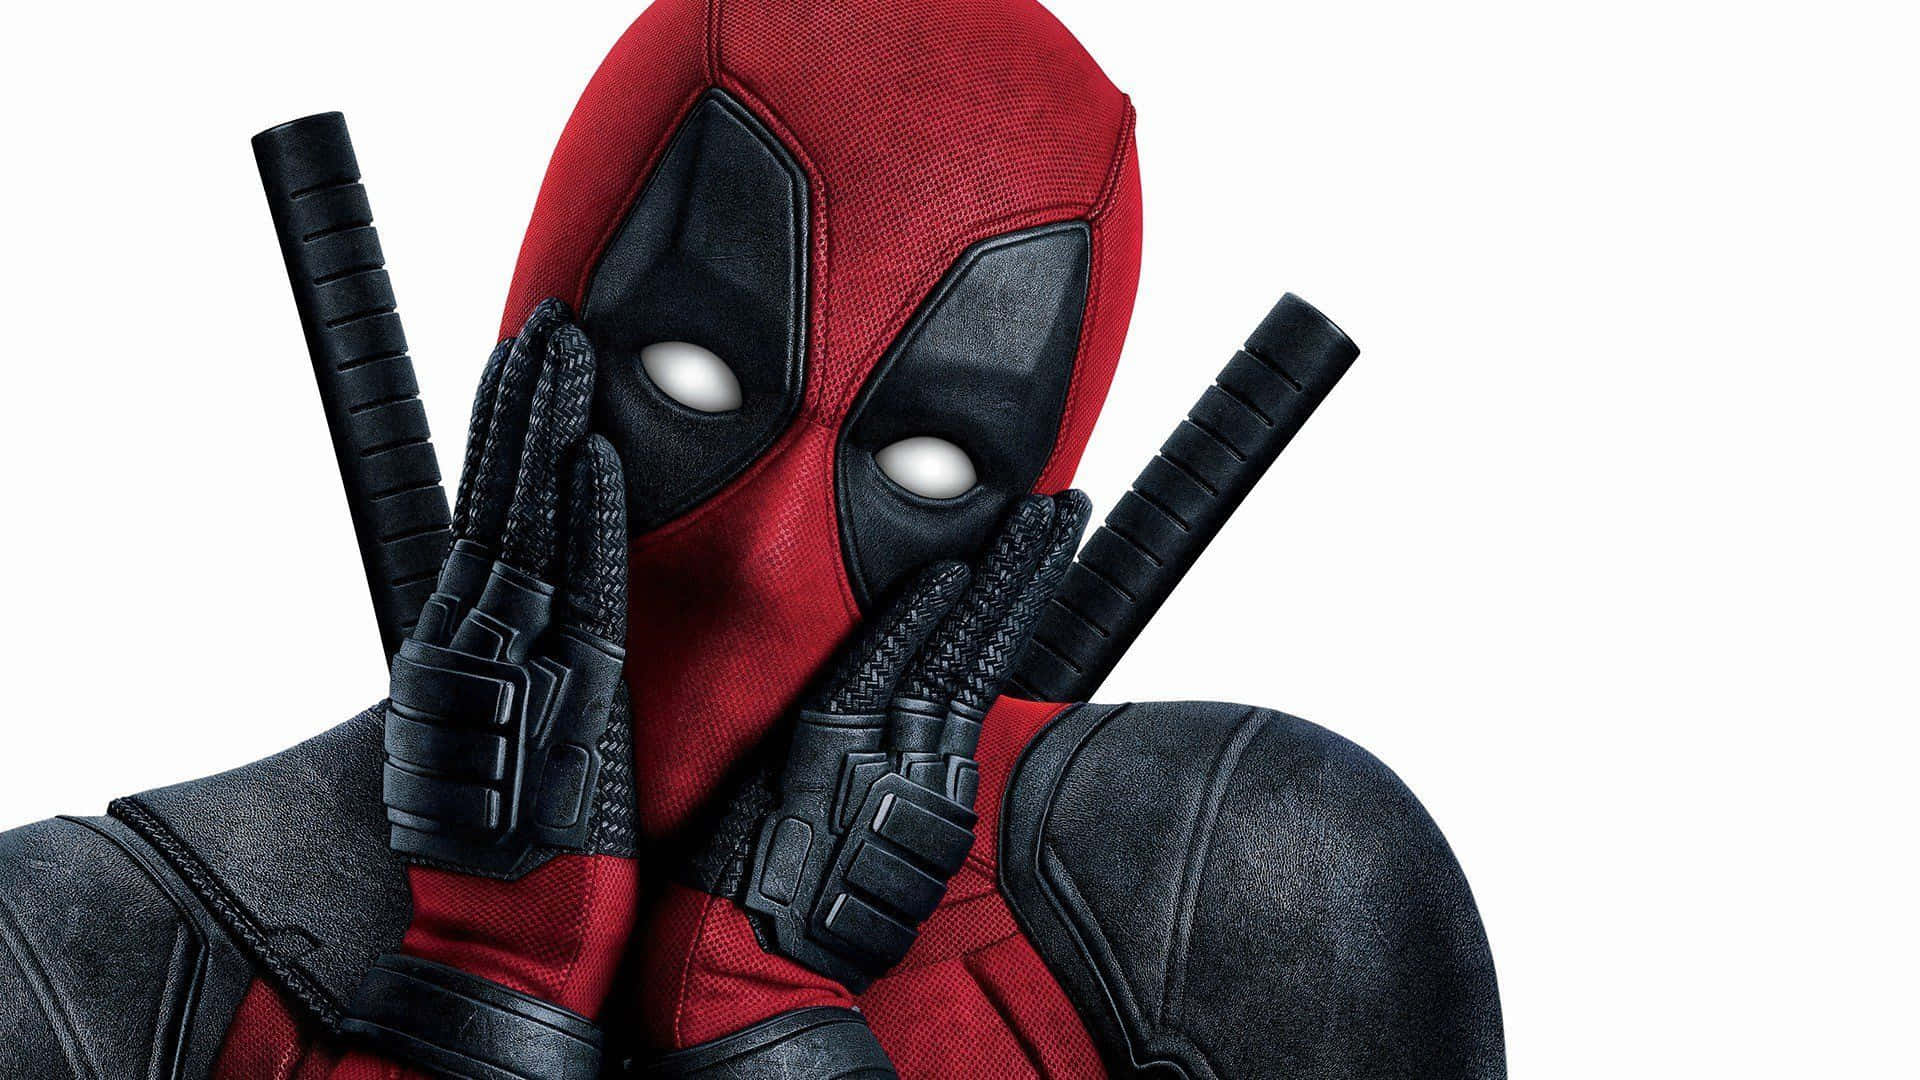 "Deadpool shows his funny side in this hilarious photo!" Wallpaper